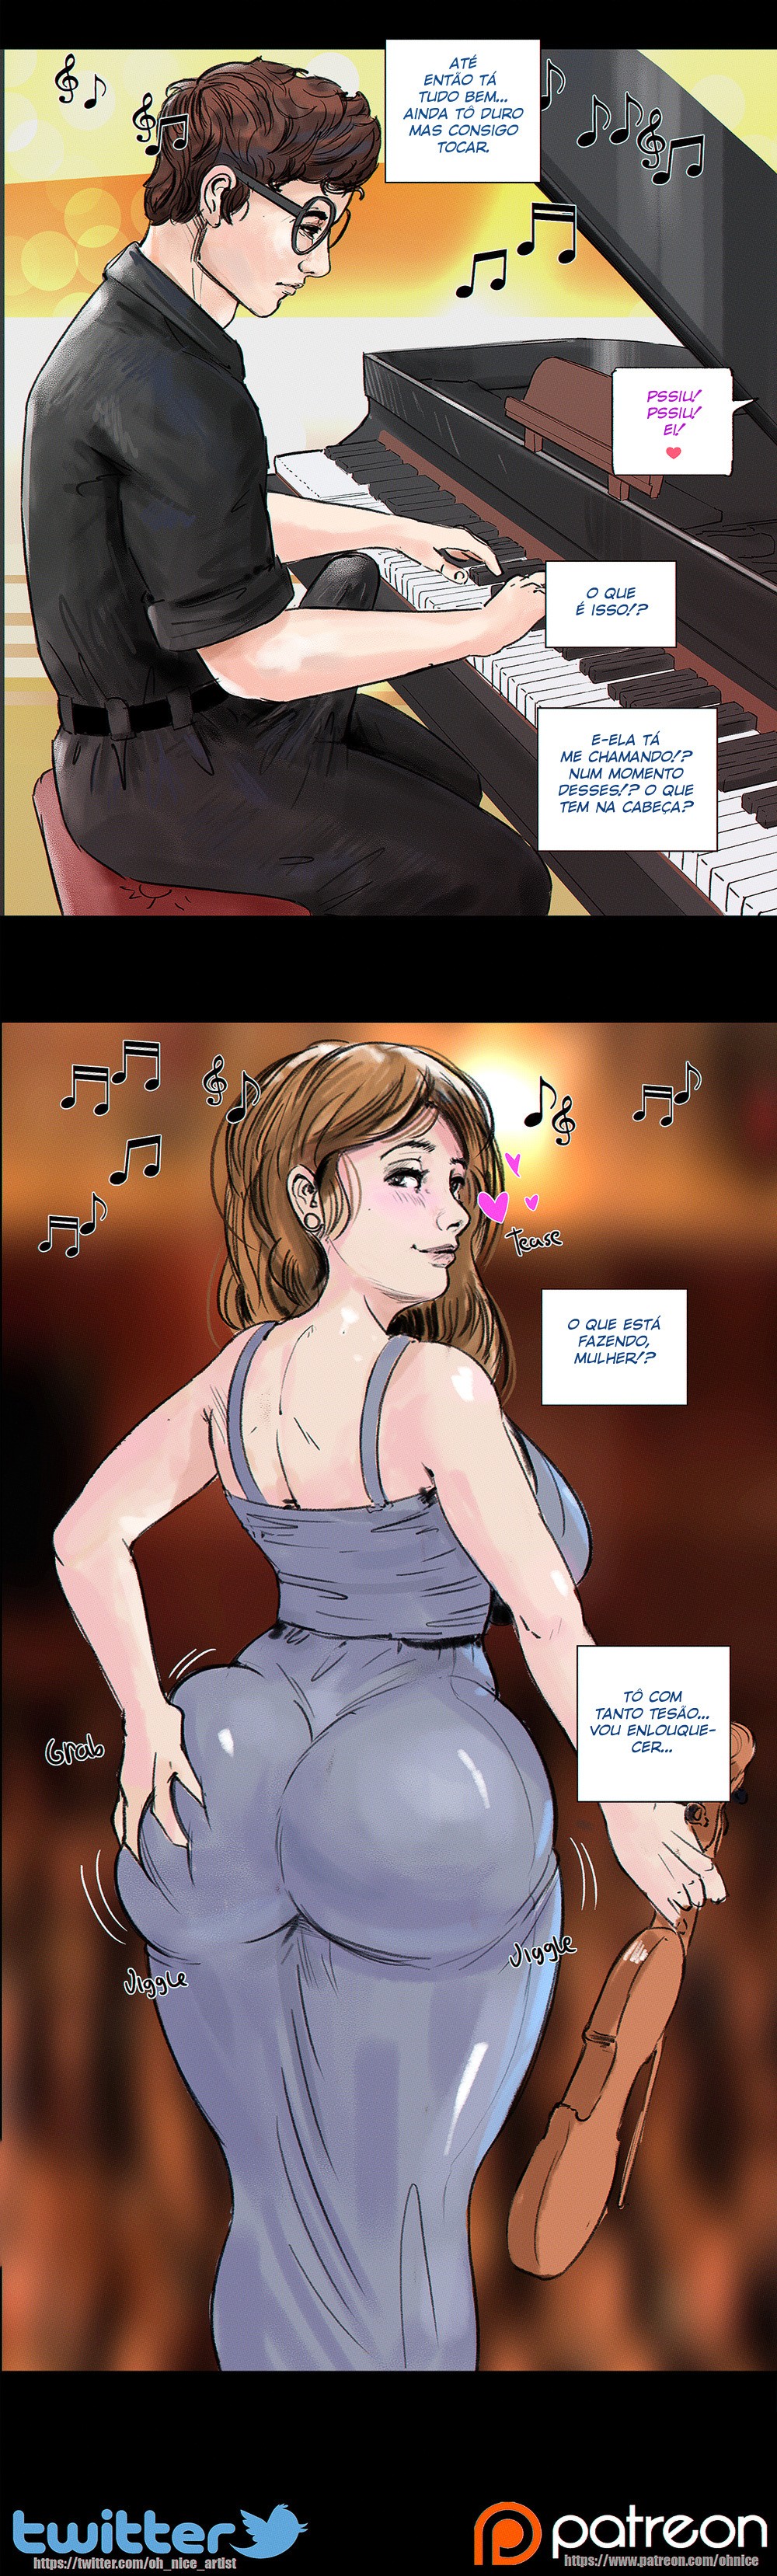 Musicians-Troubles-OhNice-Hentai-06